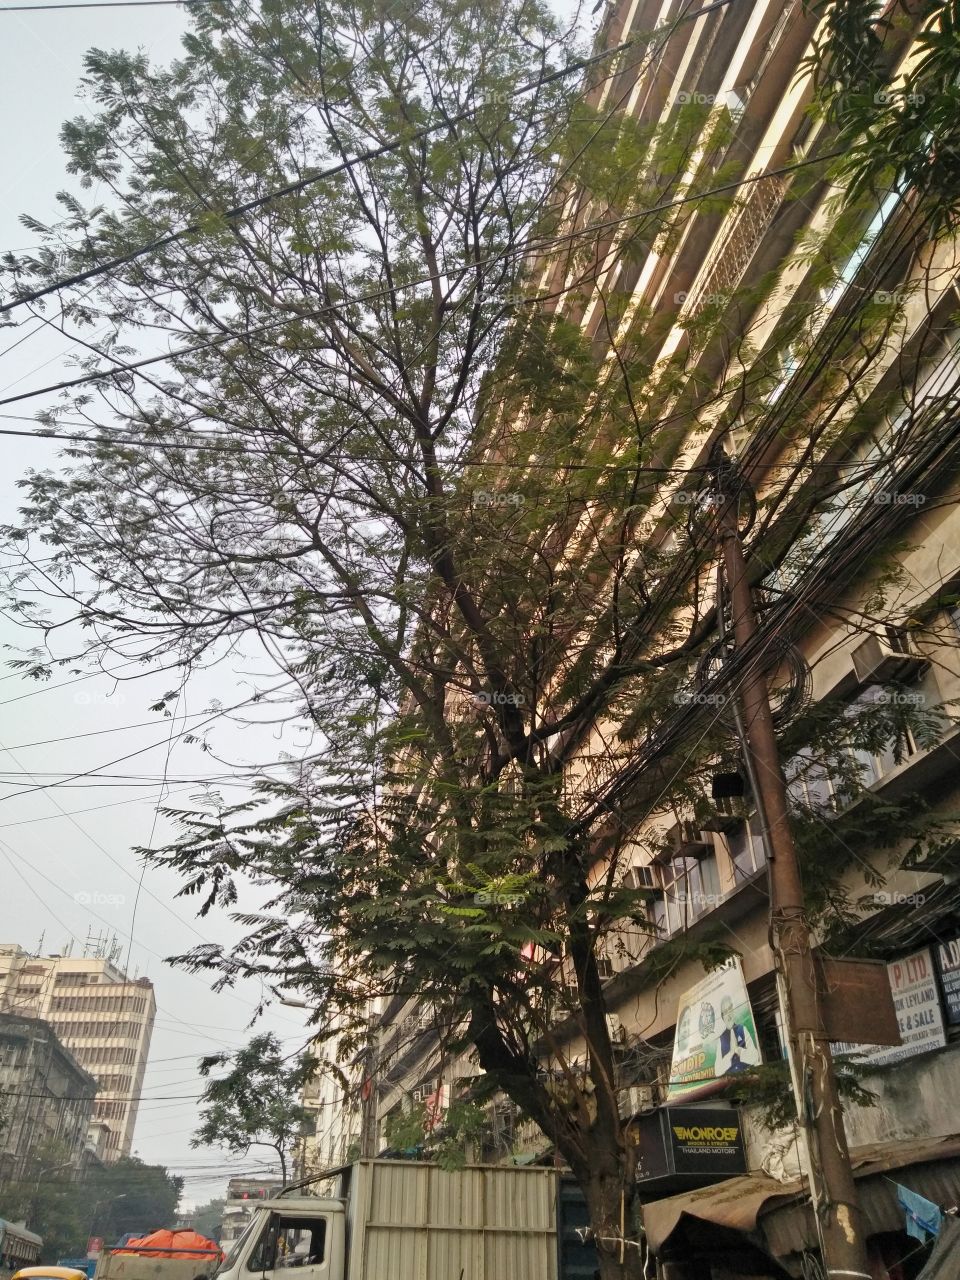 A tree fighting to survive and thrive amongst the cruel city environment in Kolkata